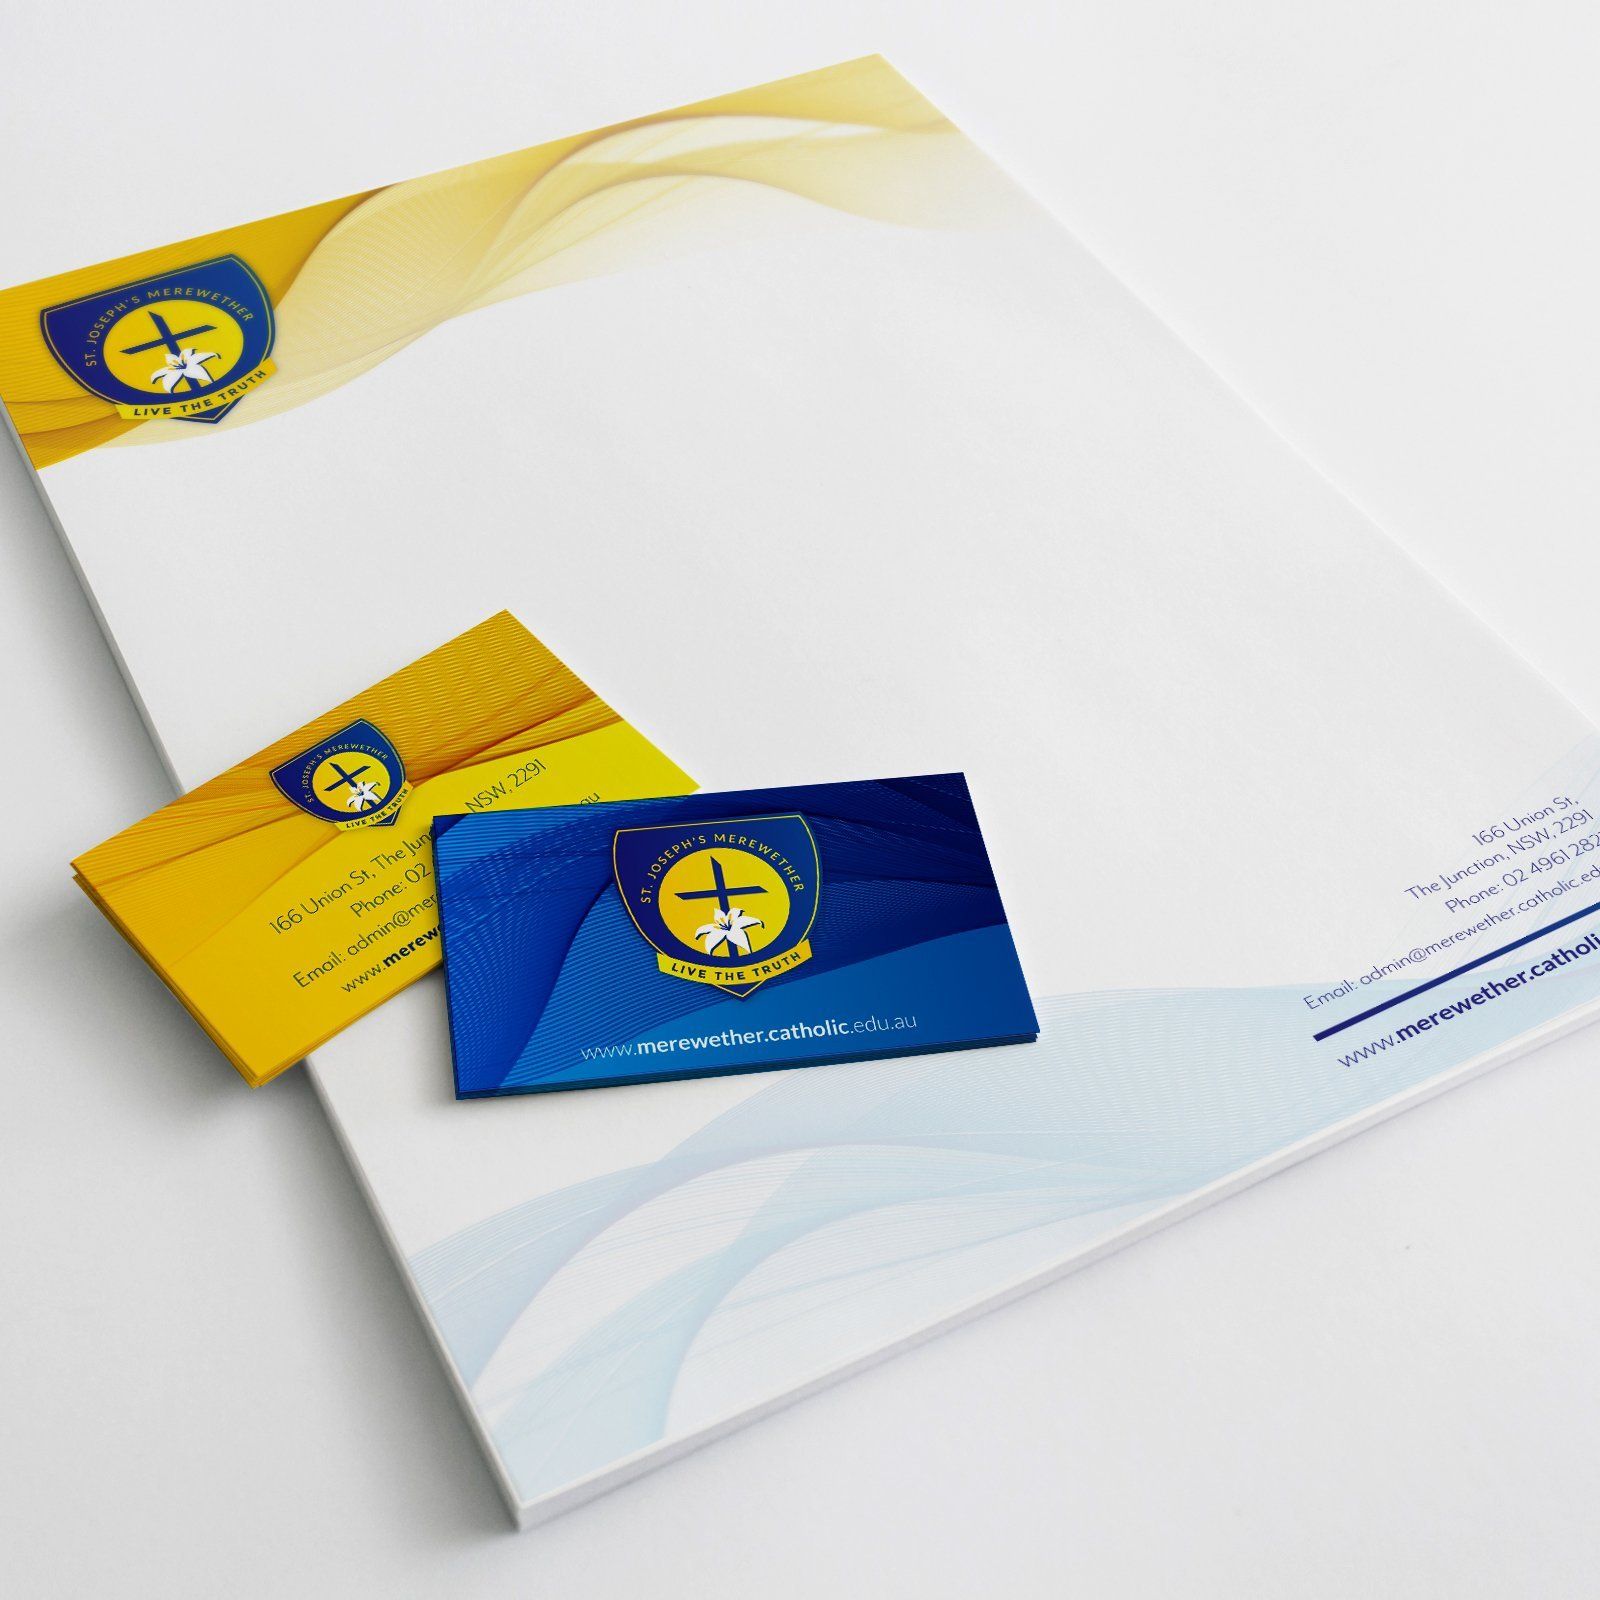 Catholic Schools Office Letterhead and Business Card